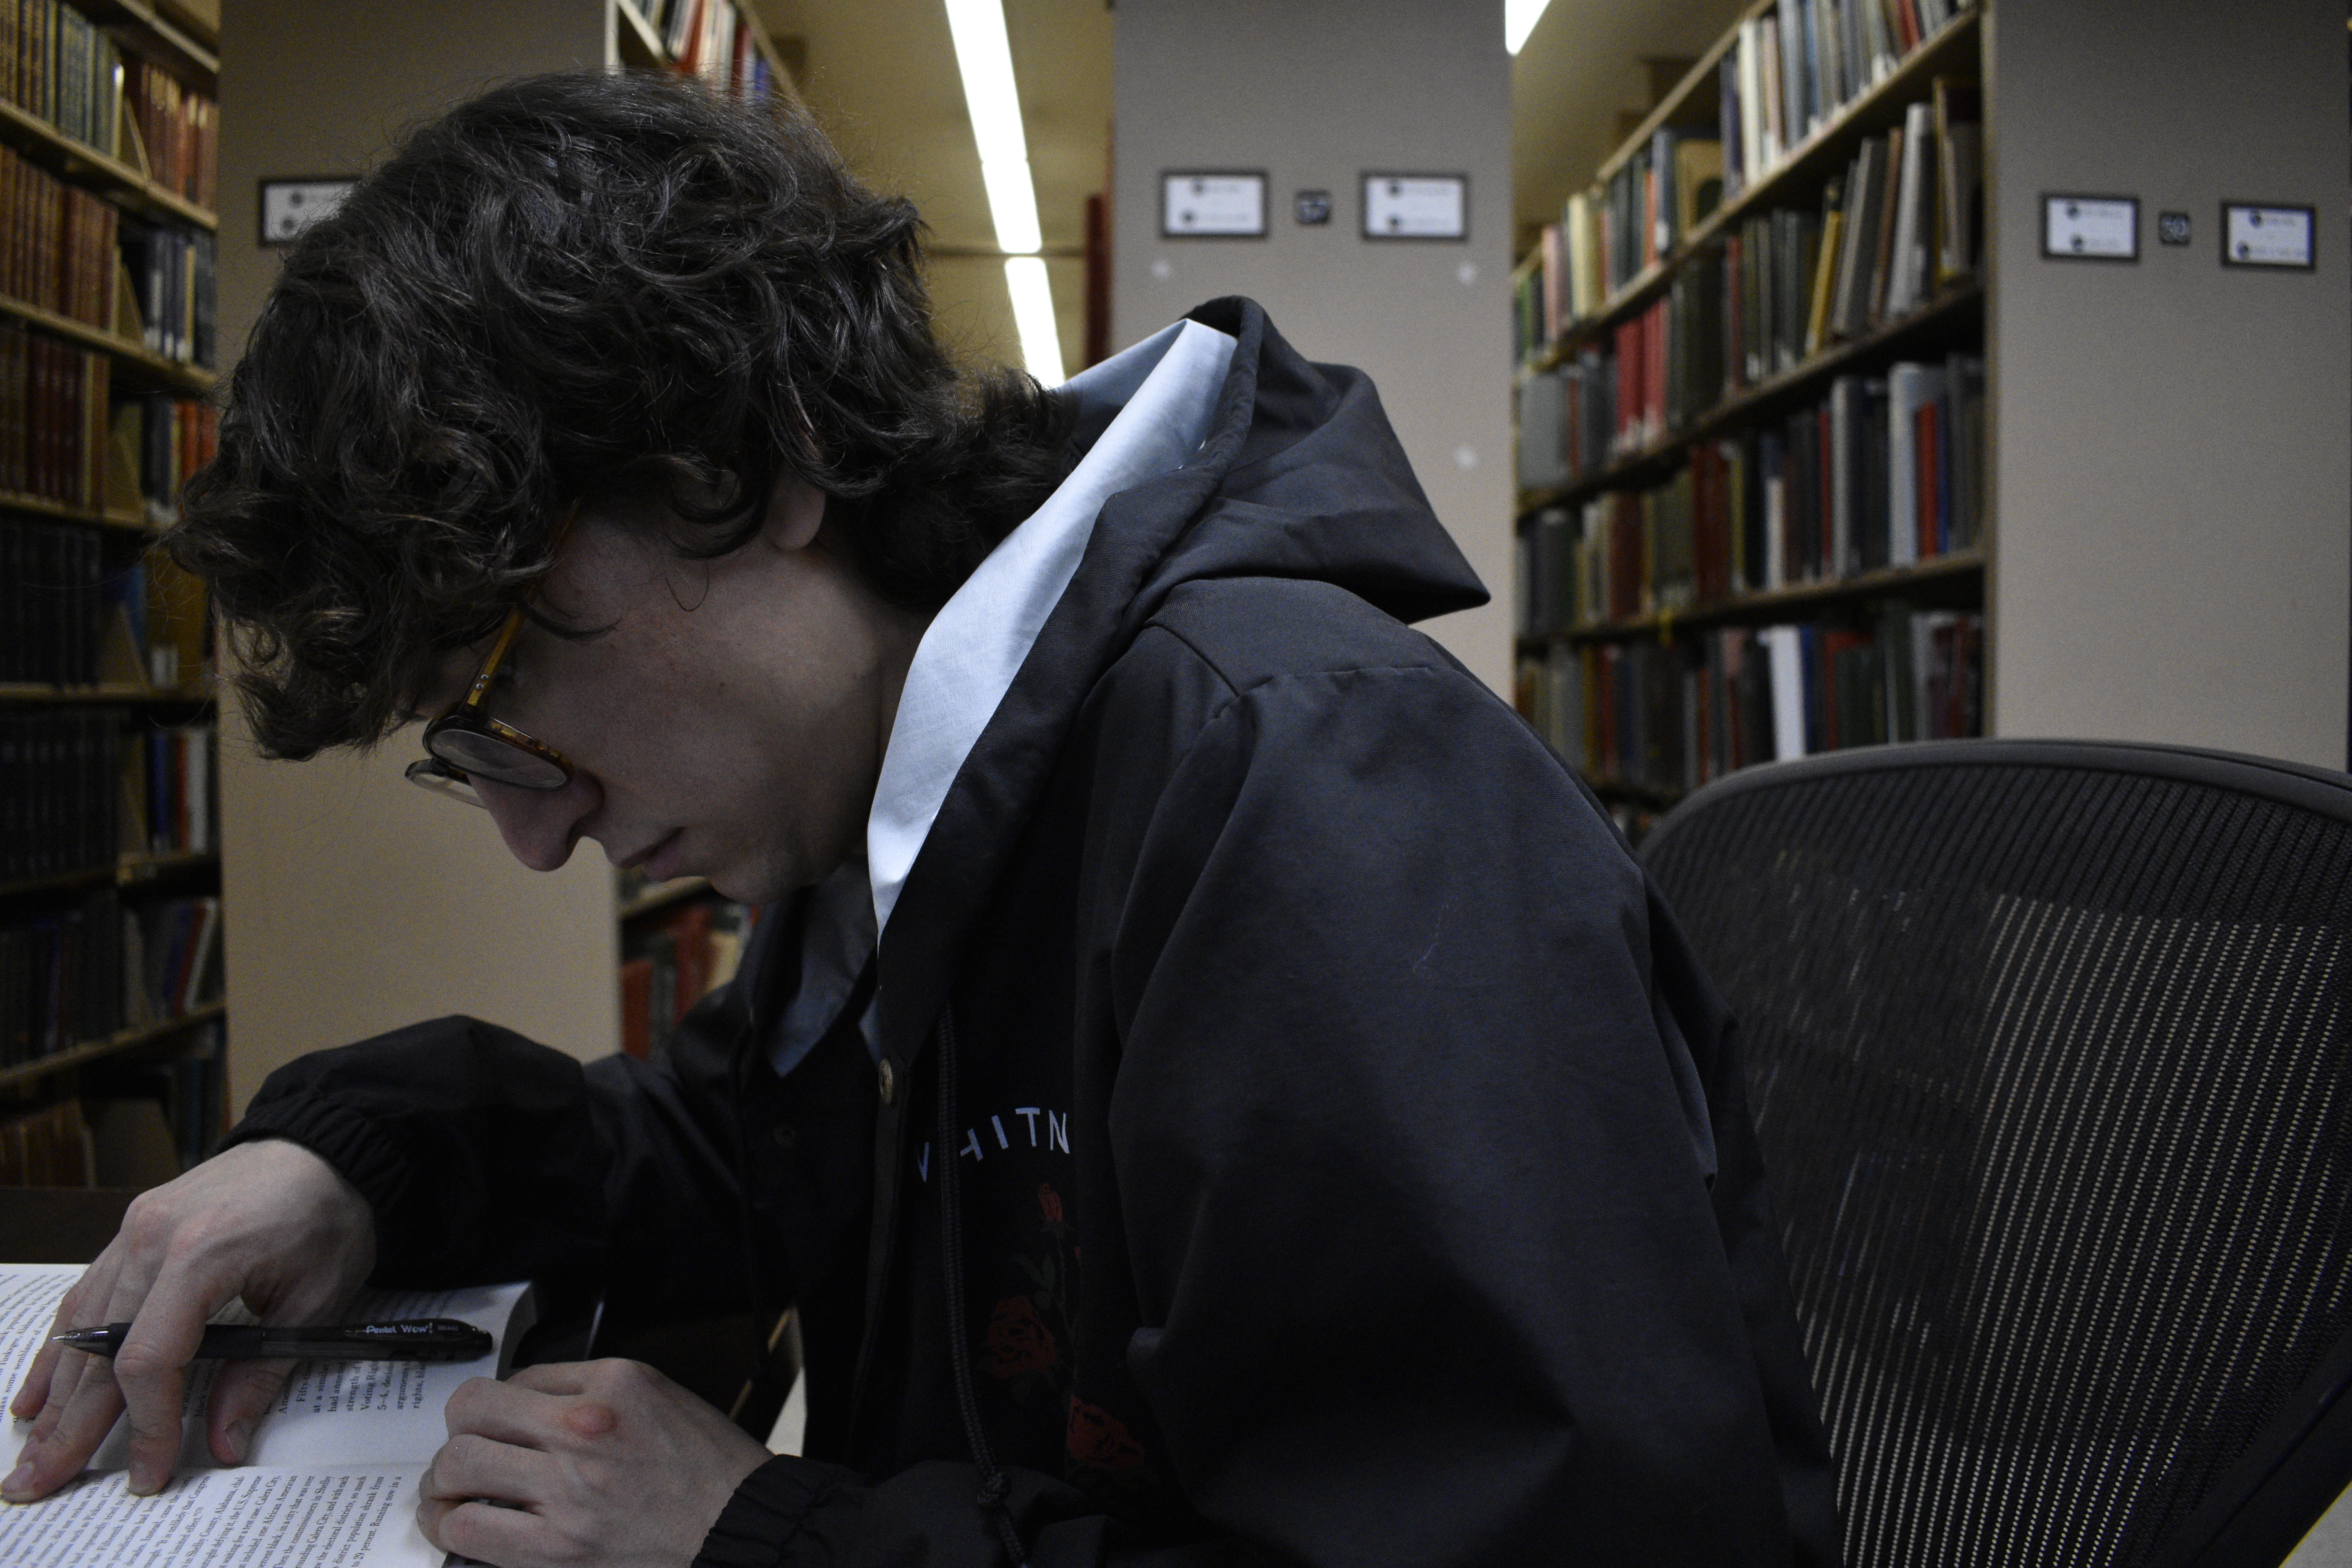 Ben working on homework at NYU's Bobst Library.